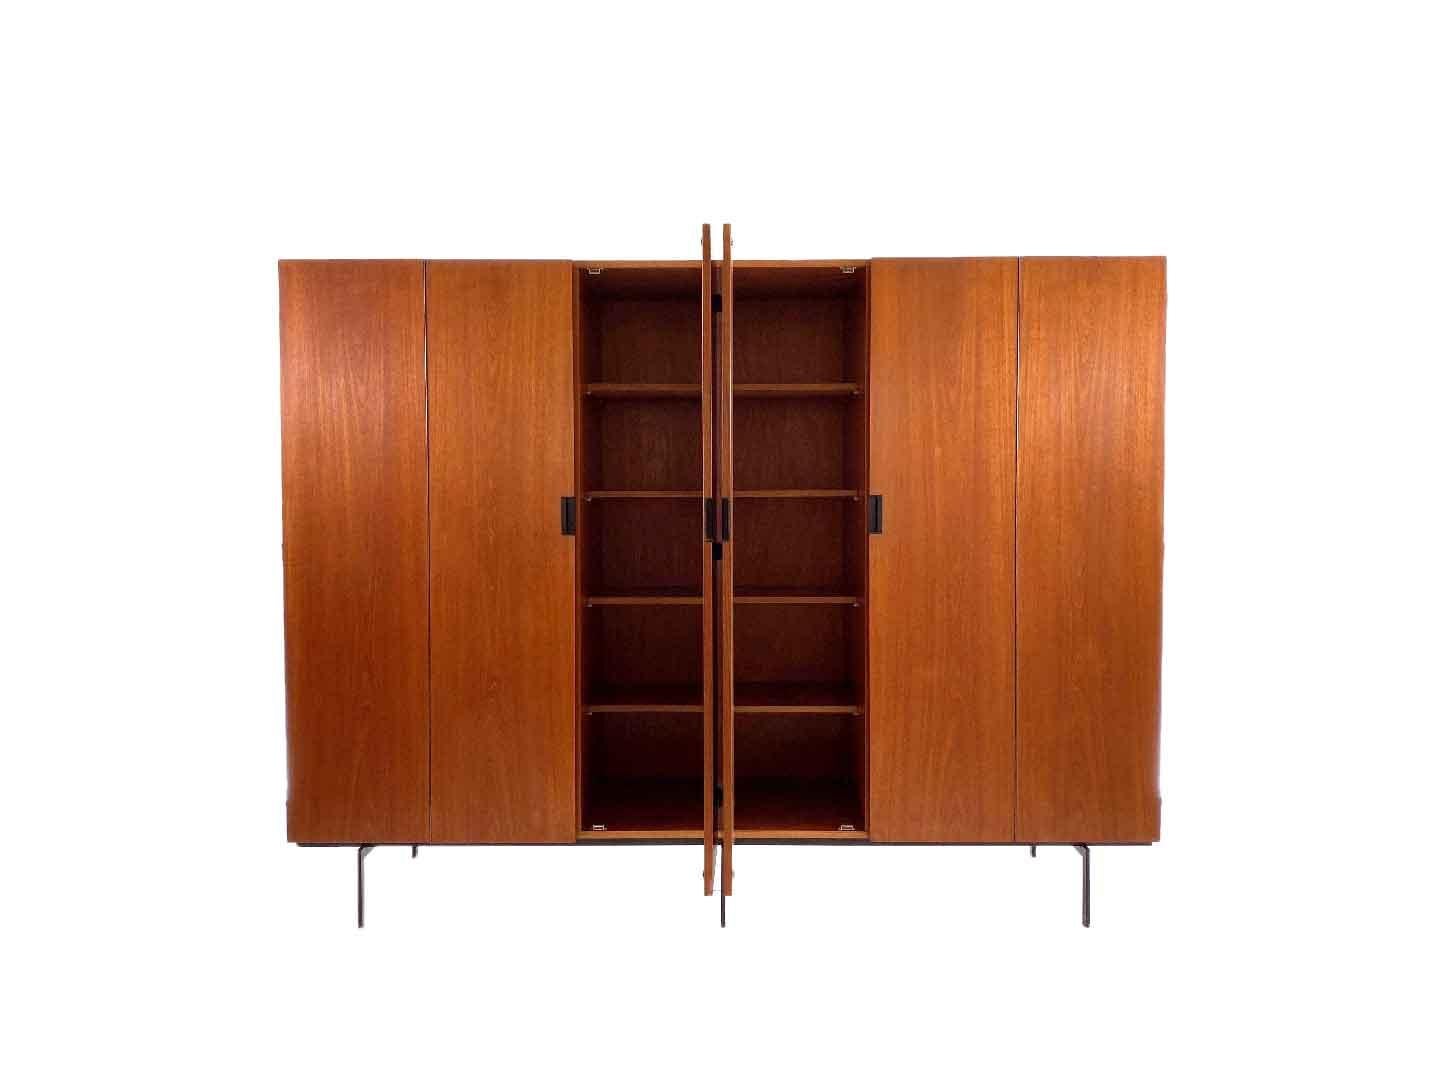 Very particularly iconic vintage KU16 wardrobe by Cees Braakman, produced by Pastoe in 1958. The wardrobe belongs to the Japanese series of Pastoe and is a true Dutch design classic. The wardrobe has 6 doors with two hanging rooms and 10 storage